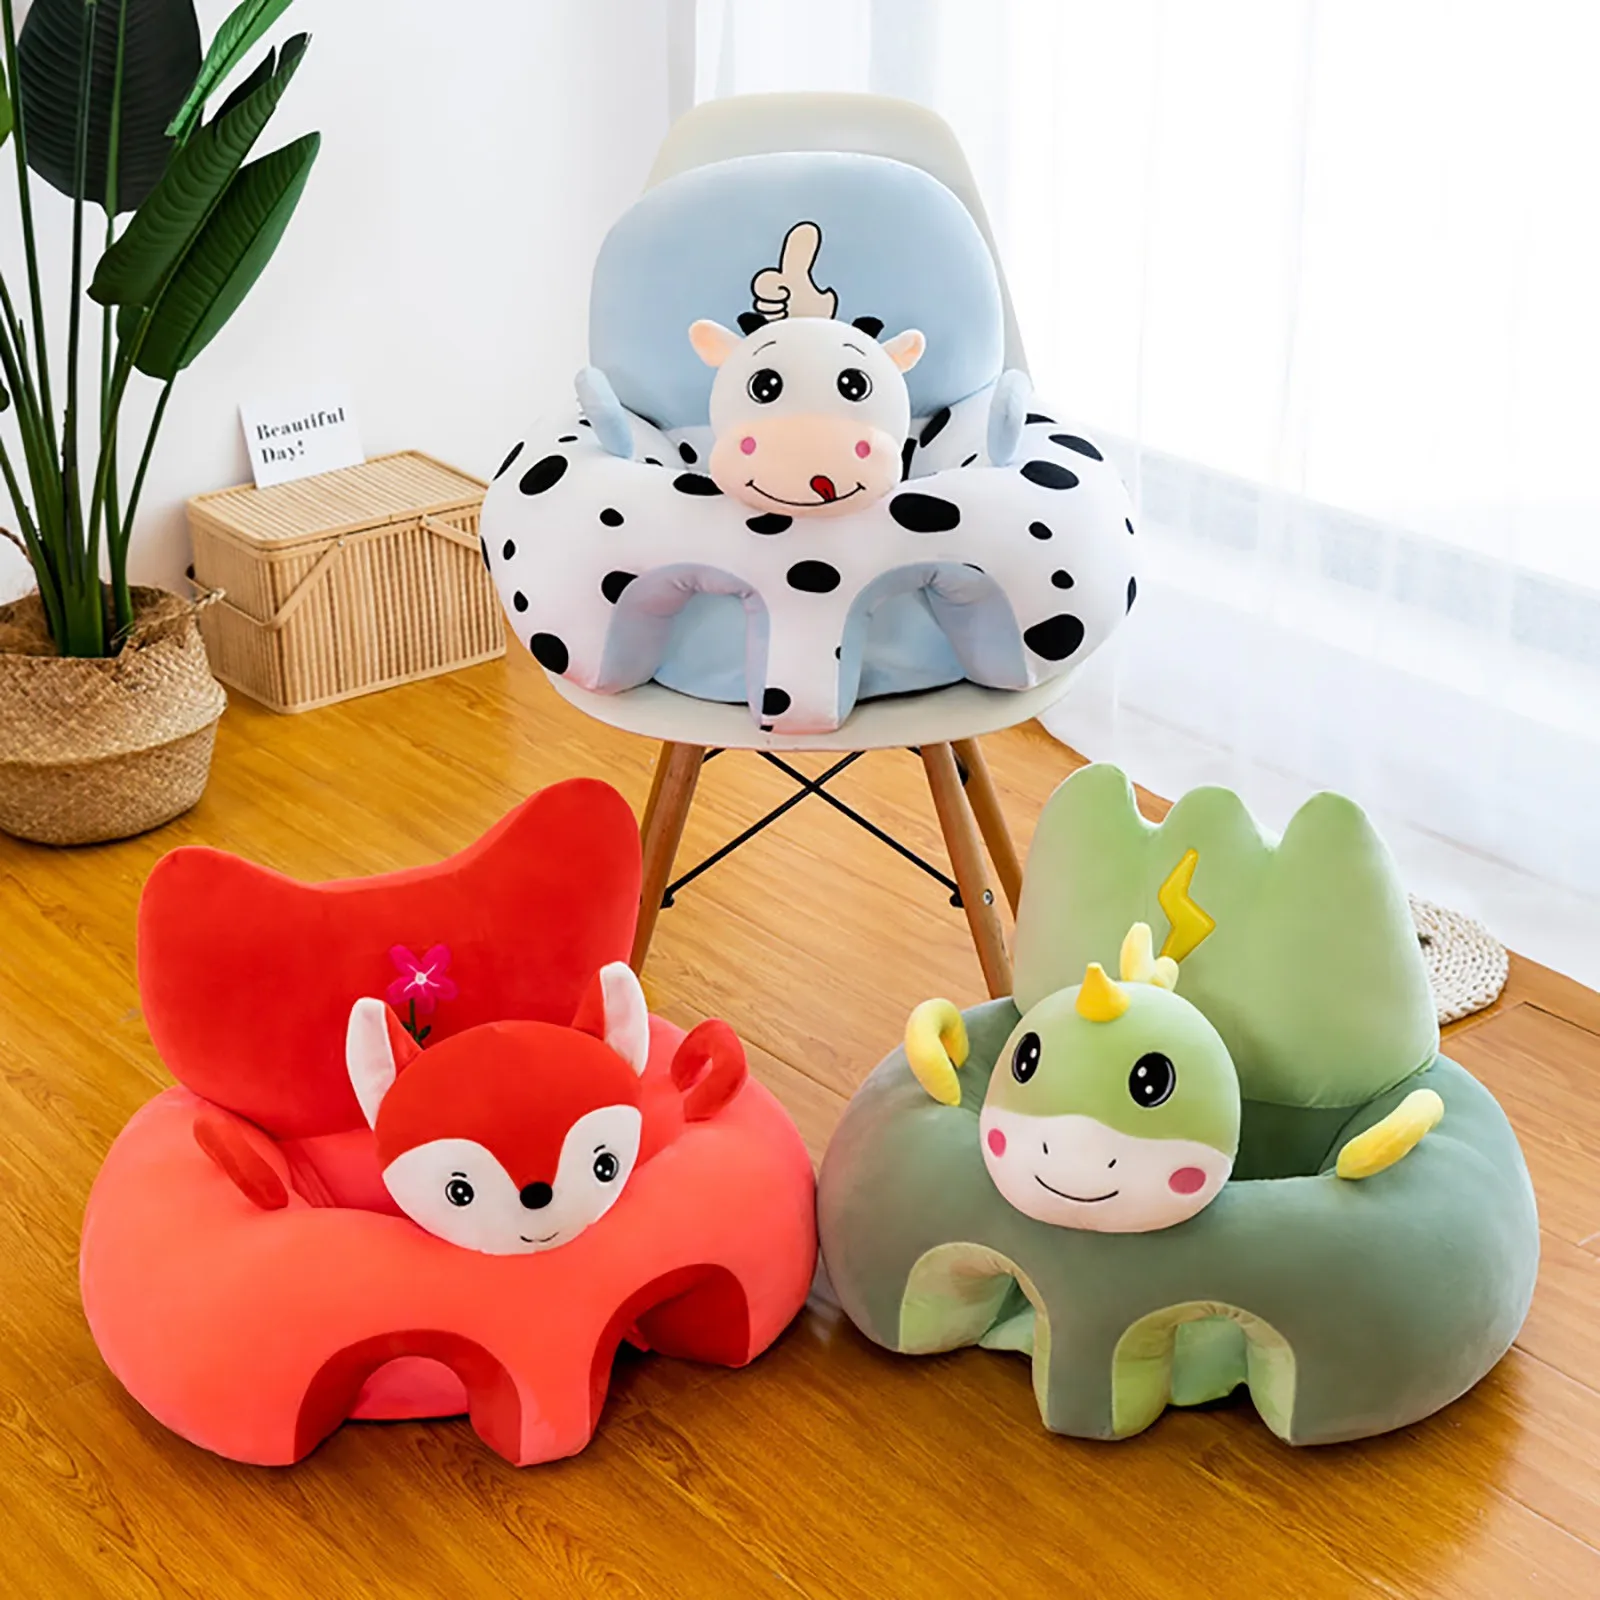 2022 New Style Children Chair Animal Shape Sofa Cartoon Plush Toy Learning Seat Learning Baby Portable Filled With Cotton kids panda bear plush chair comfy animal sofa backrest armchair children sofa cartoon toy lazy cute baby small sofa seat